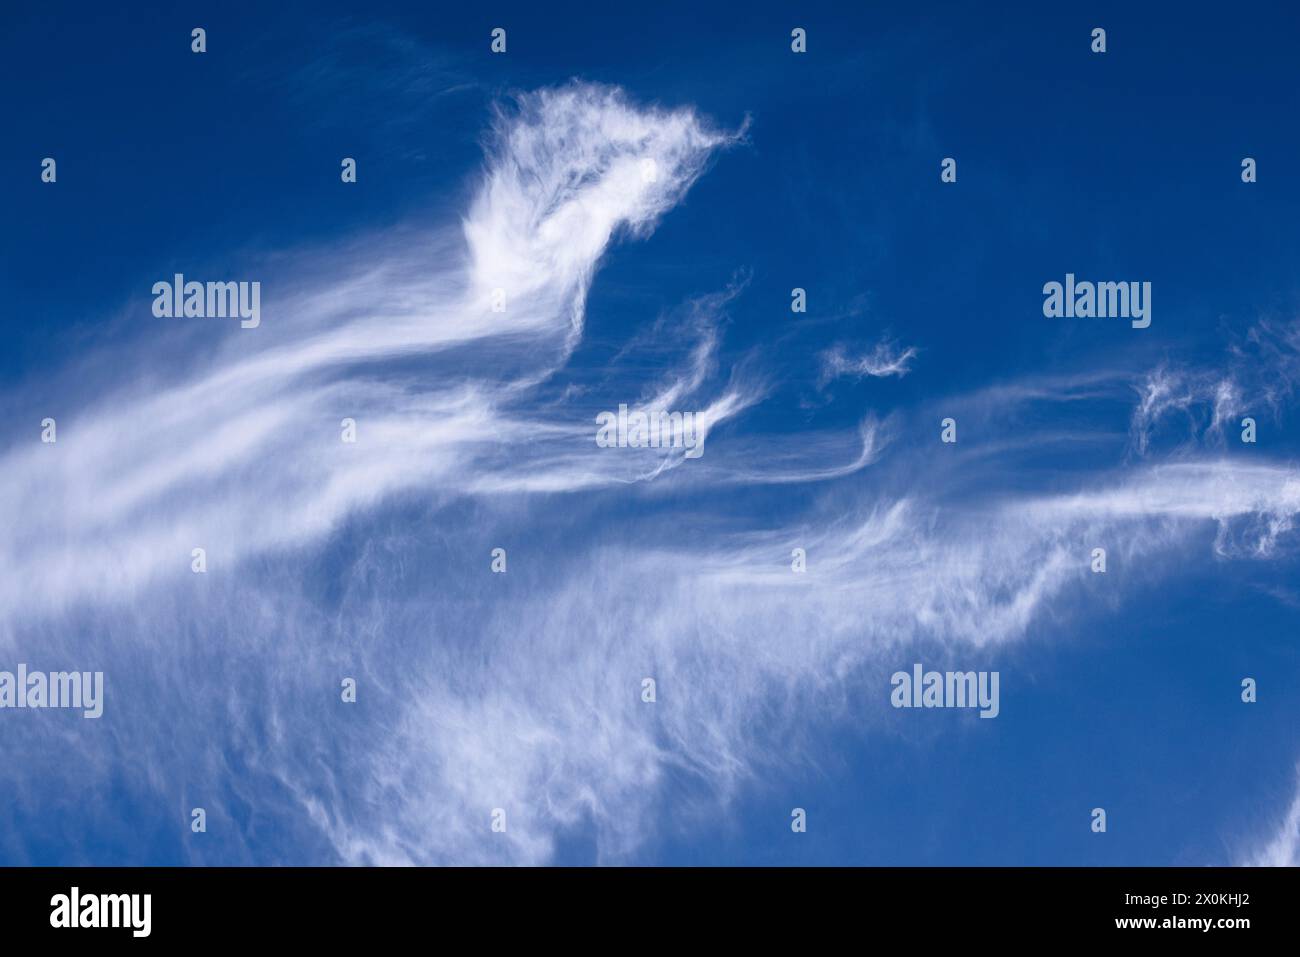 Cirrus clouds ruffled by the wind in the blue sky Stock Photo